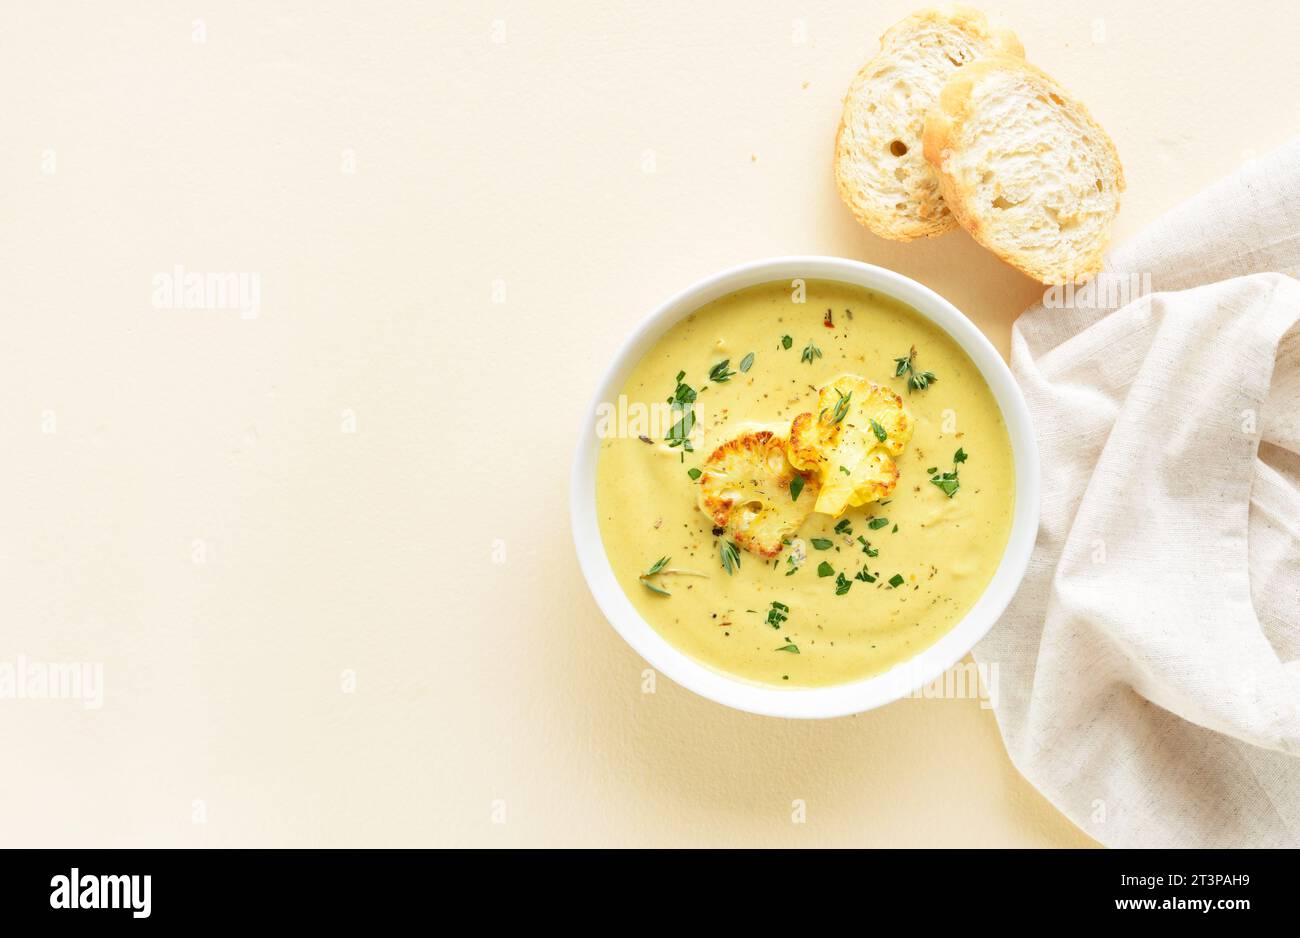 Cauliflower cheese soup in bowl over light background with copy space. Vegetarian or healthy diet food concept. Top view, flat lay Stock Photo